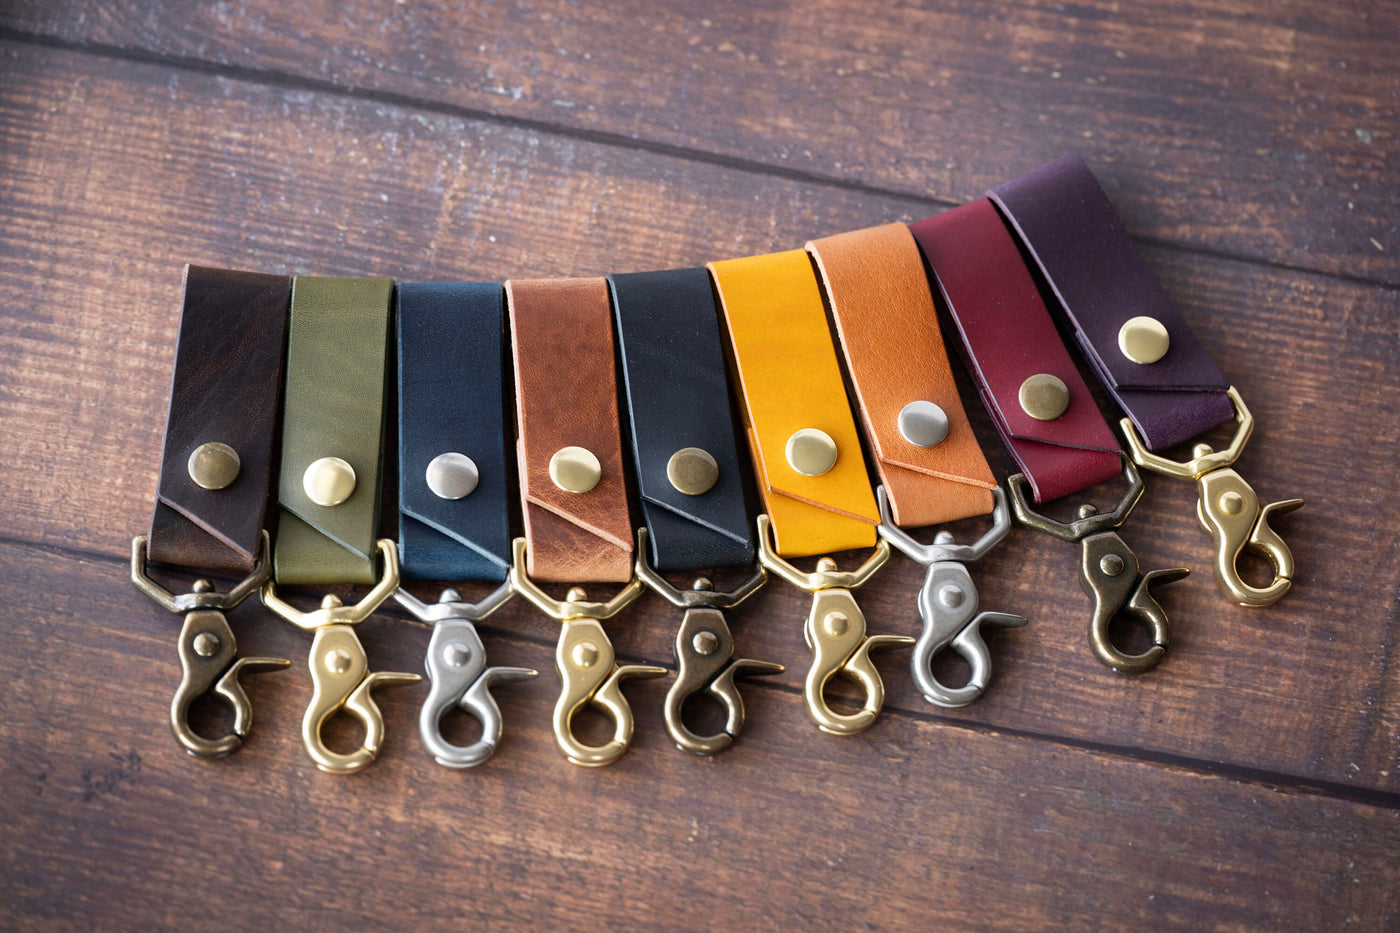 Boho Leather Keychain, Personalized Key Snap, Custom Leather Key chain, Key Fob Gift, Belt Clip Key Ring, Present For Him or Her